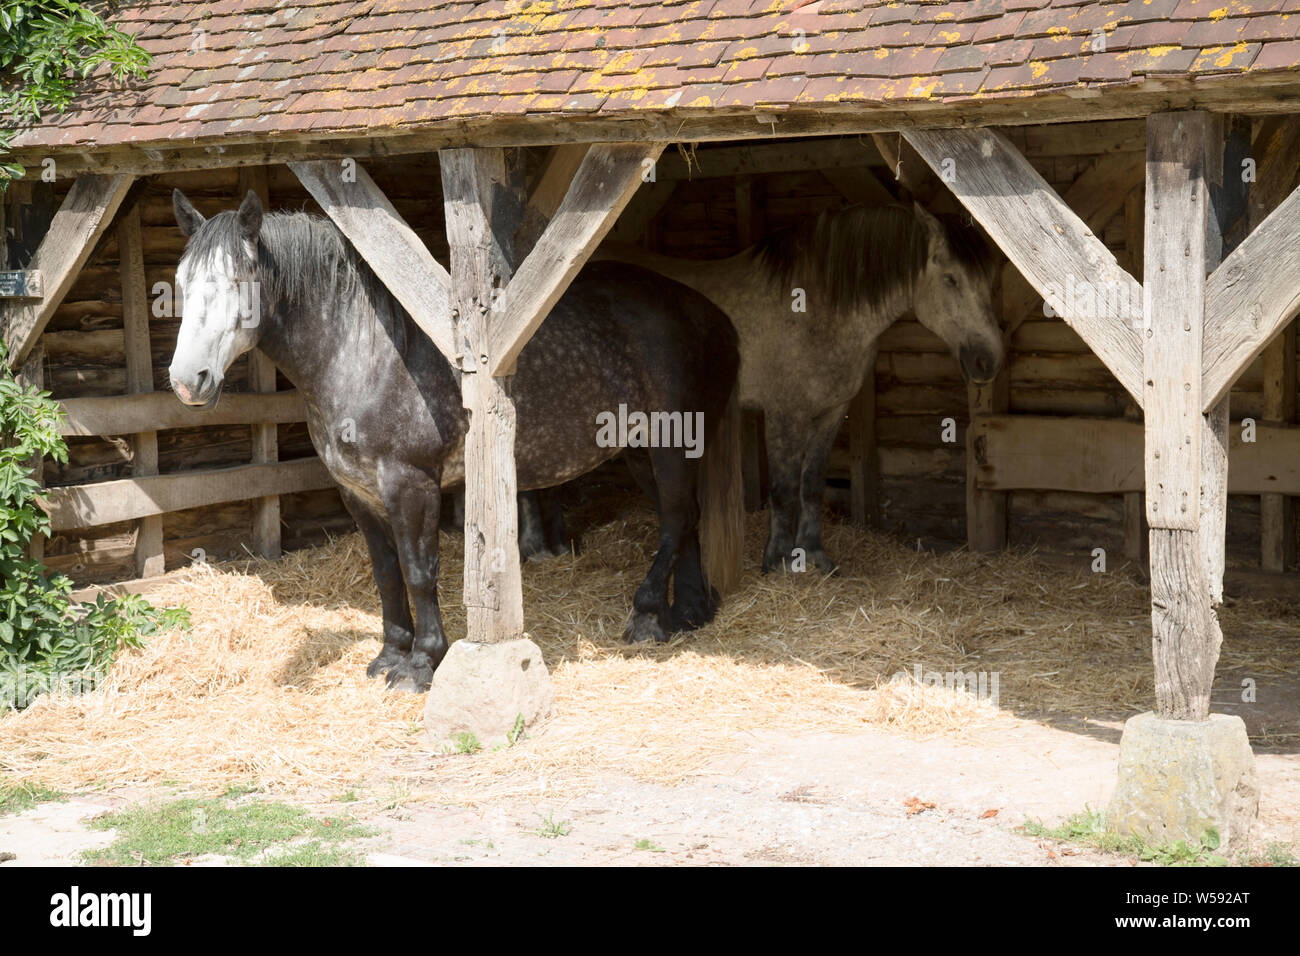 Working horses, Sussex Downs, England Stock Photo